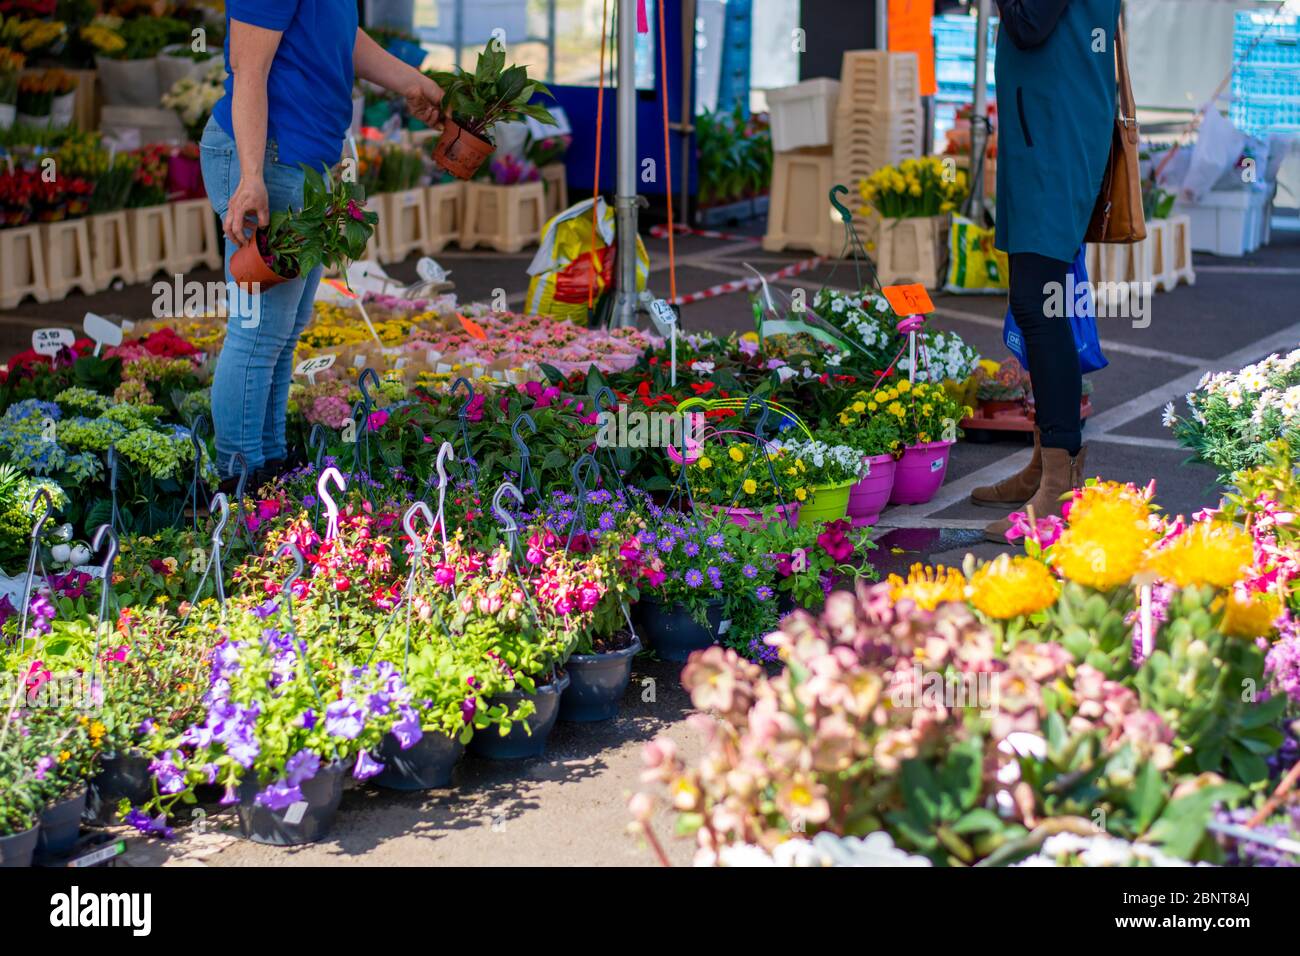 A display of flowers for sale at a street market. Different varieties of flowers at a outdoor flower stall. Owner and customer talk to each other. Stock Photo